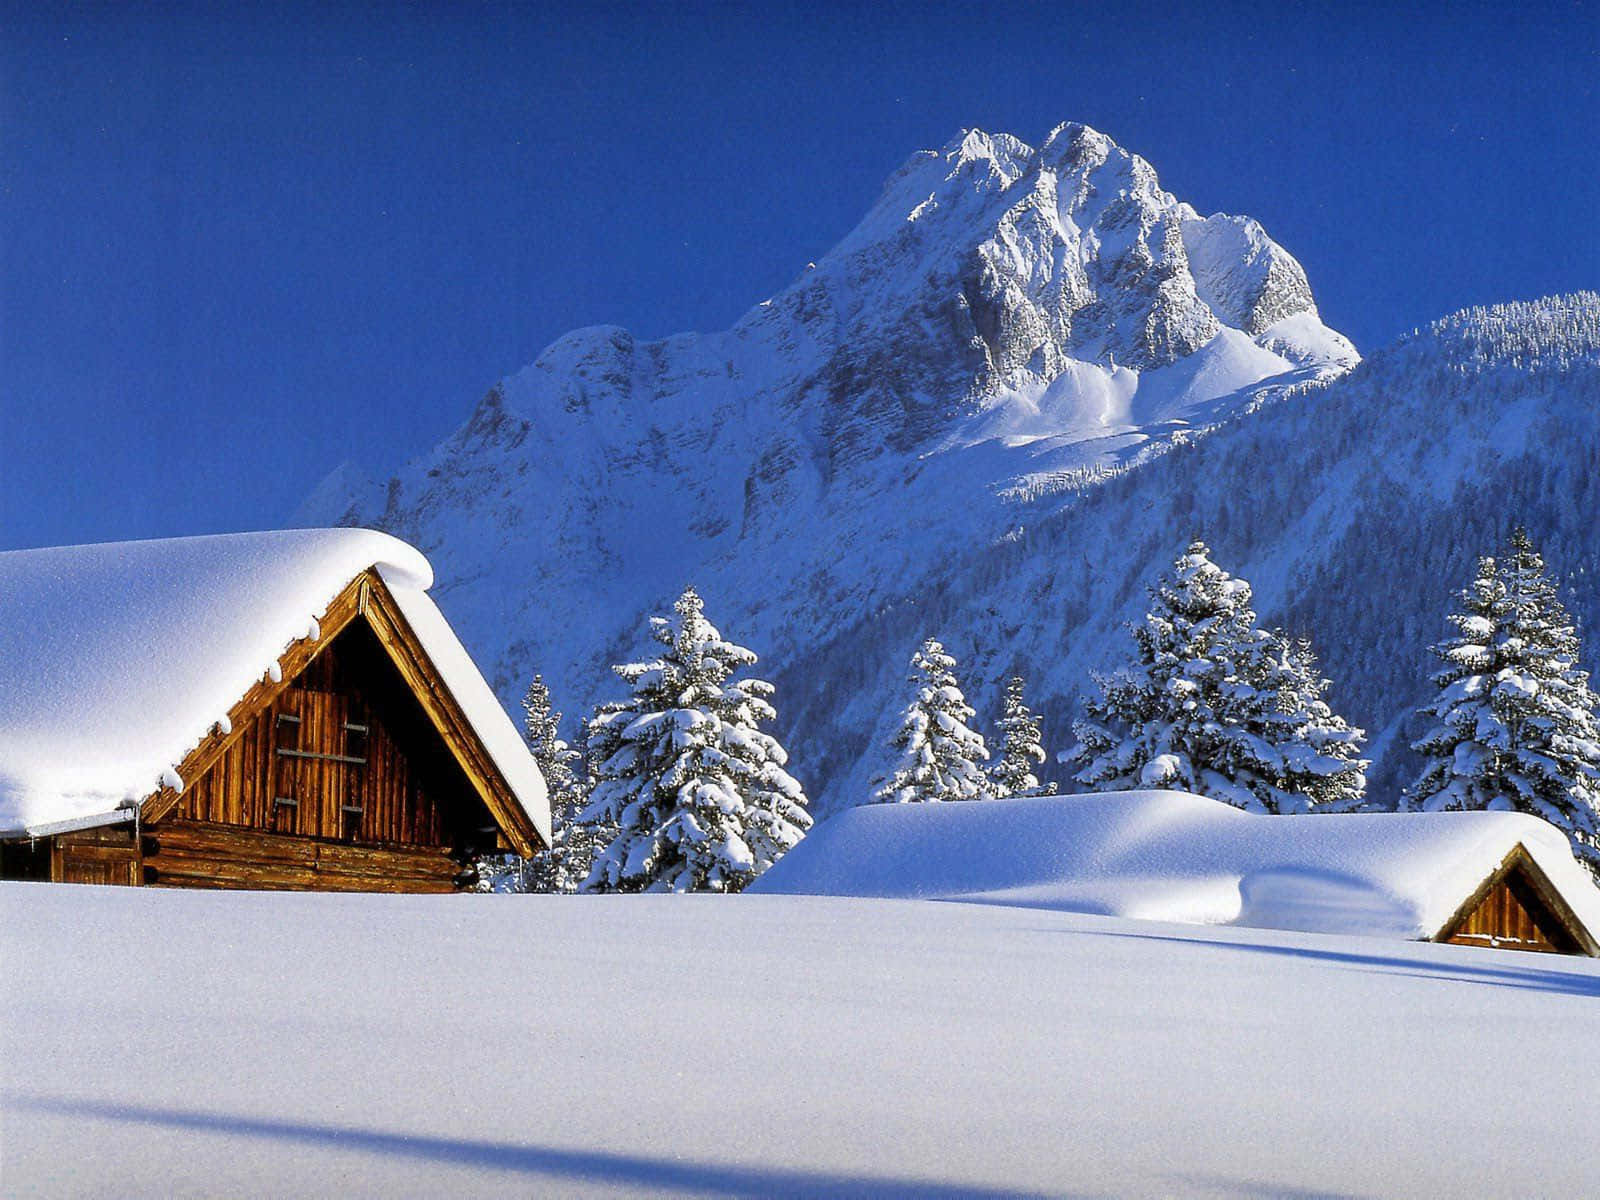 A peaceful view of the snow-covered countryside